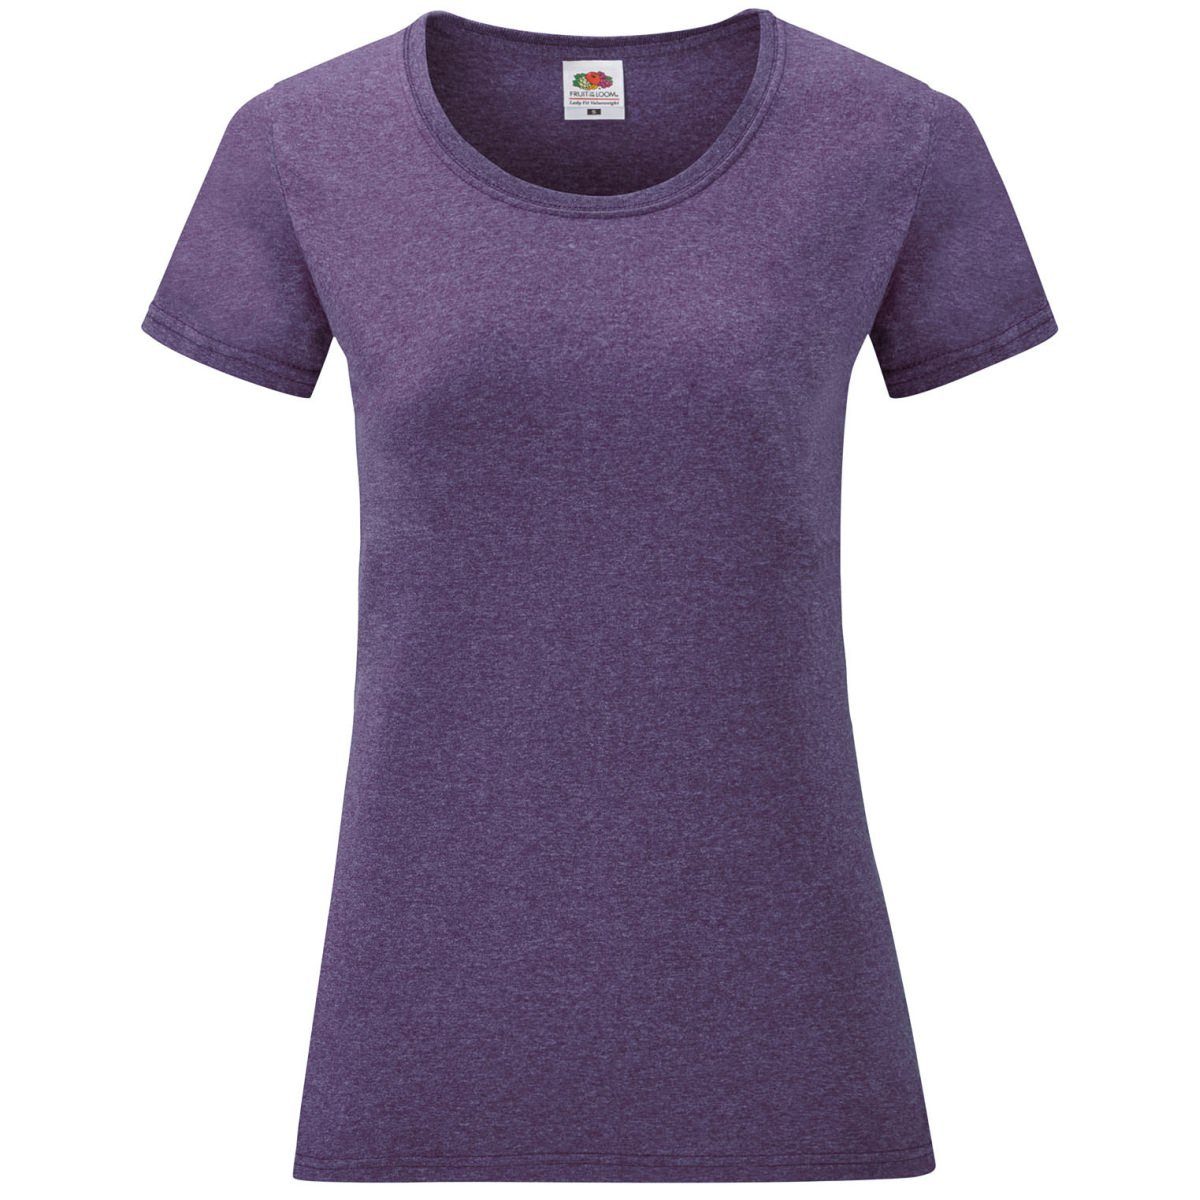 Fruit of the Loom Fruit Lady-Fit the violett T meliert Valueweight Loom Rundhalsshirt of